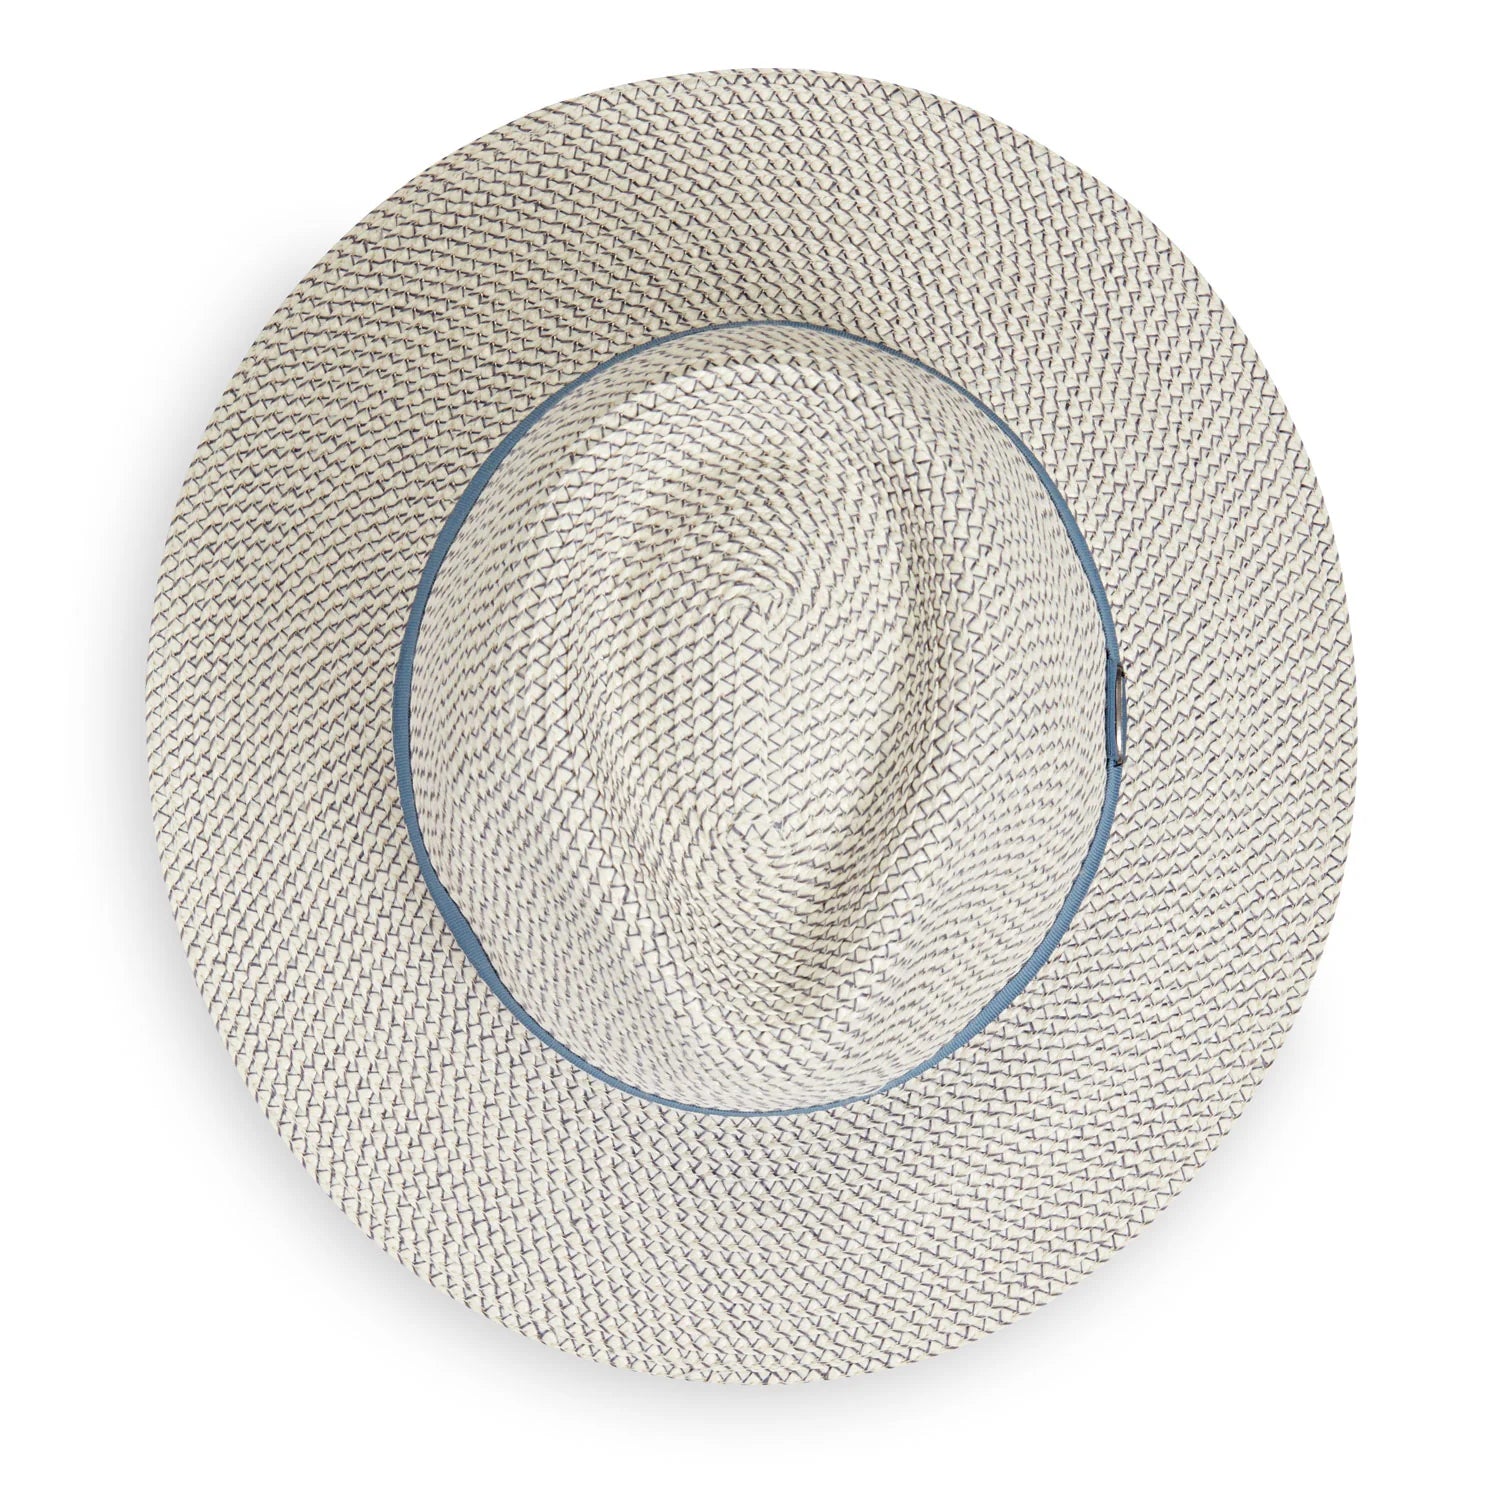 Sophisticated structure and contrast stitching come together in perfect harmony. The Charlie fedora hat looks great when sailing or walking along the water. The neutral tones add a light and airy feel to any outfit, and its packable nature allows this hat to be taken on any adventure.&nbsp;